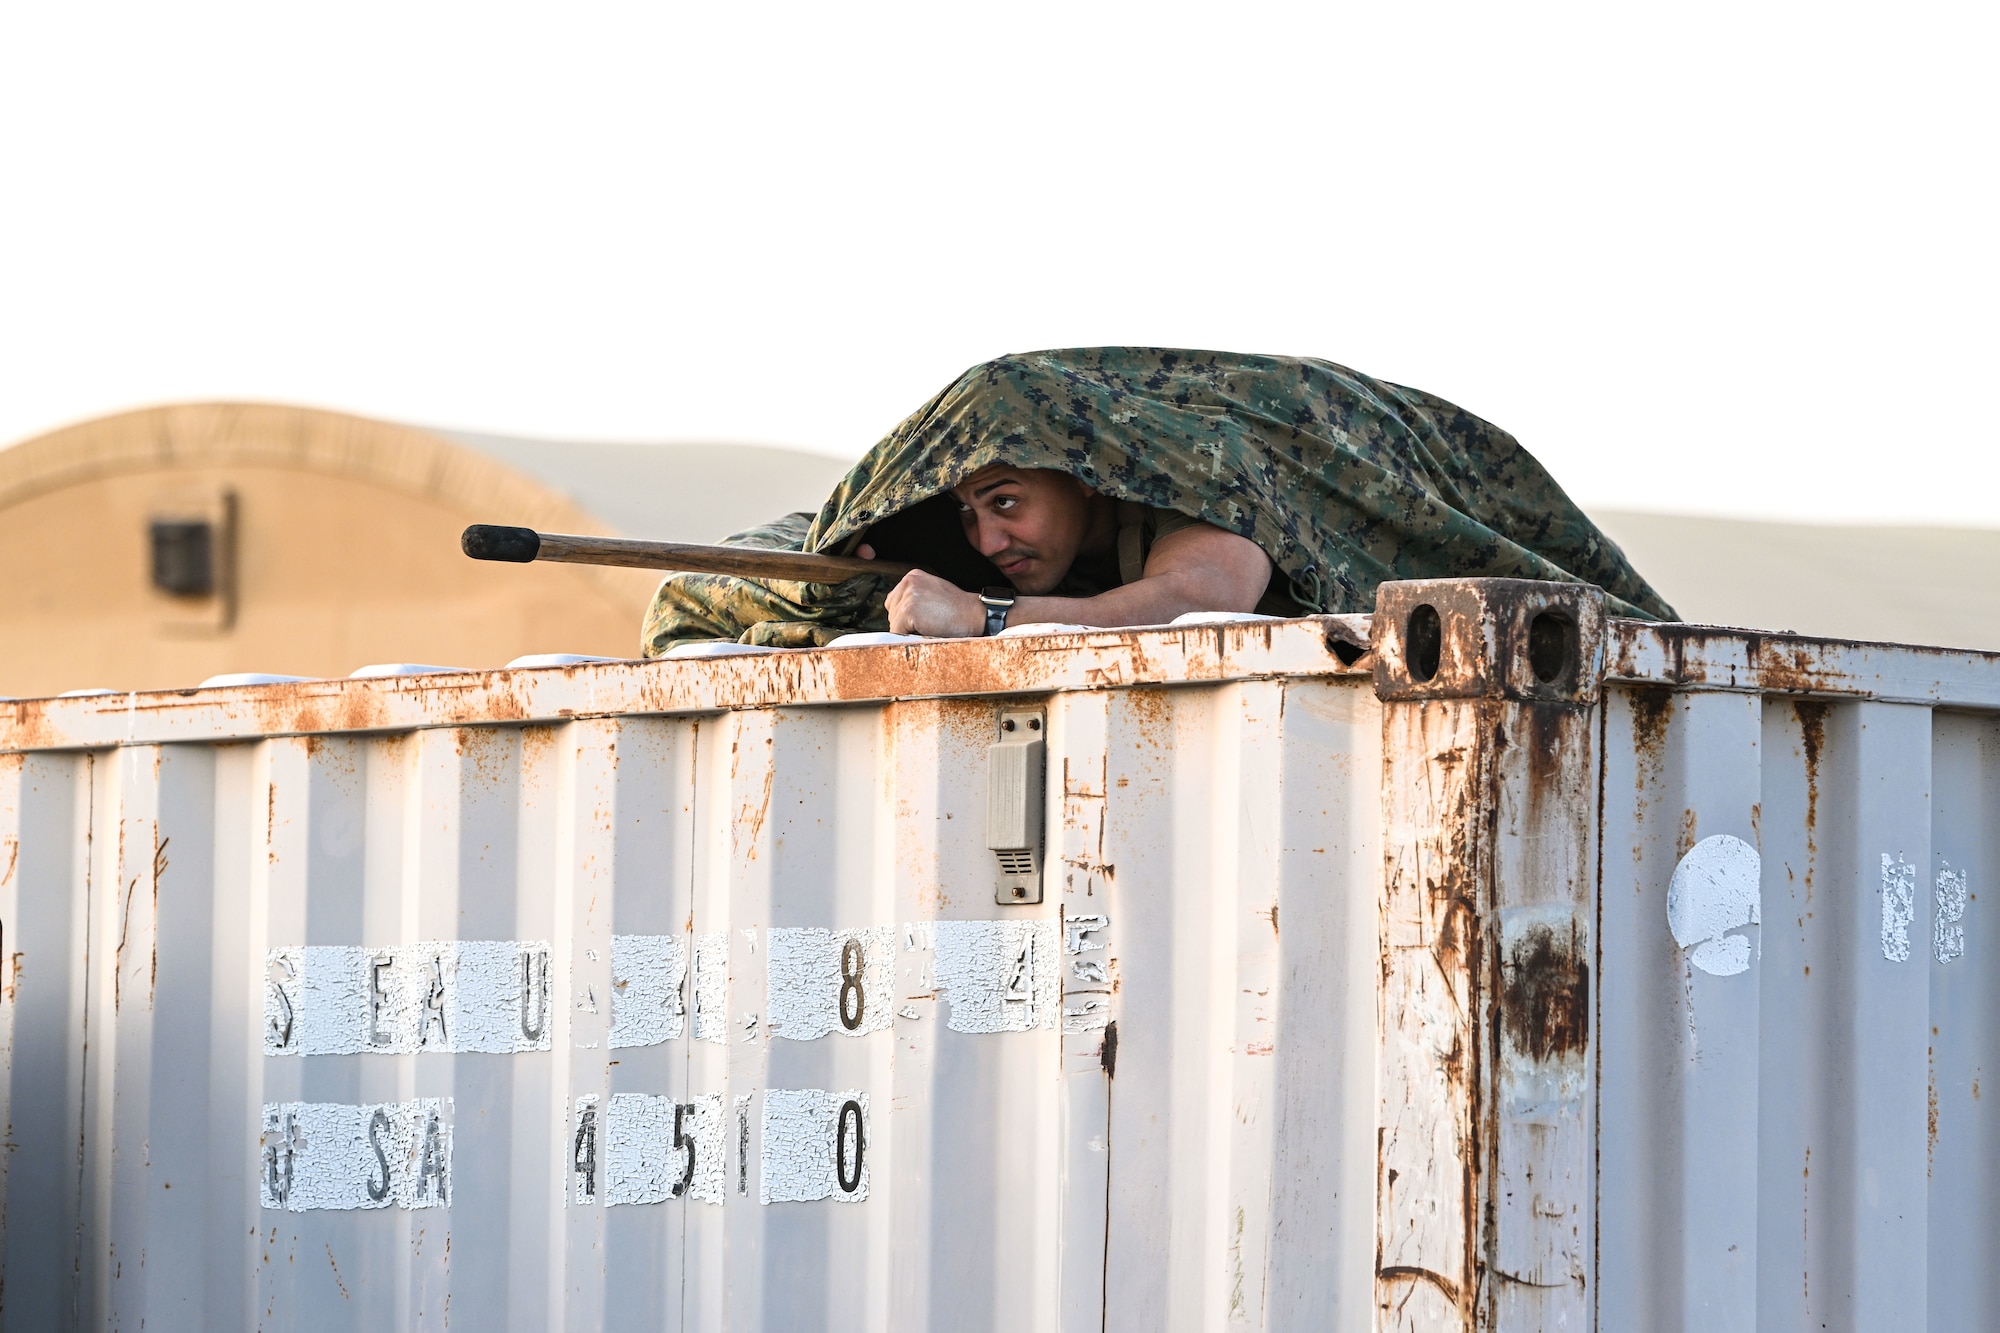 A covered U.S. Marine aims a rifle while lying prone on top of a shipping container.